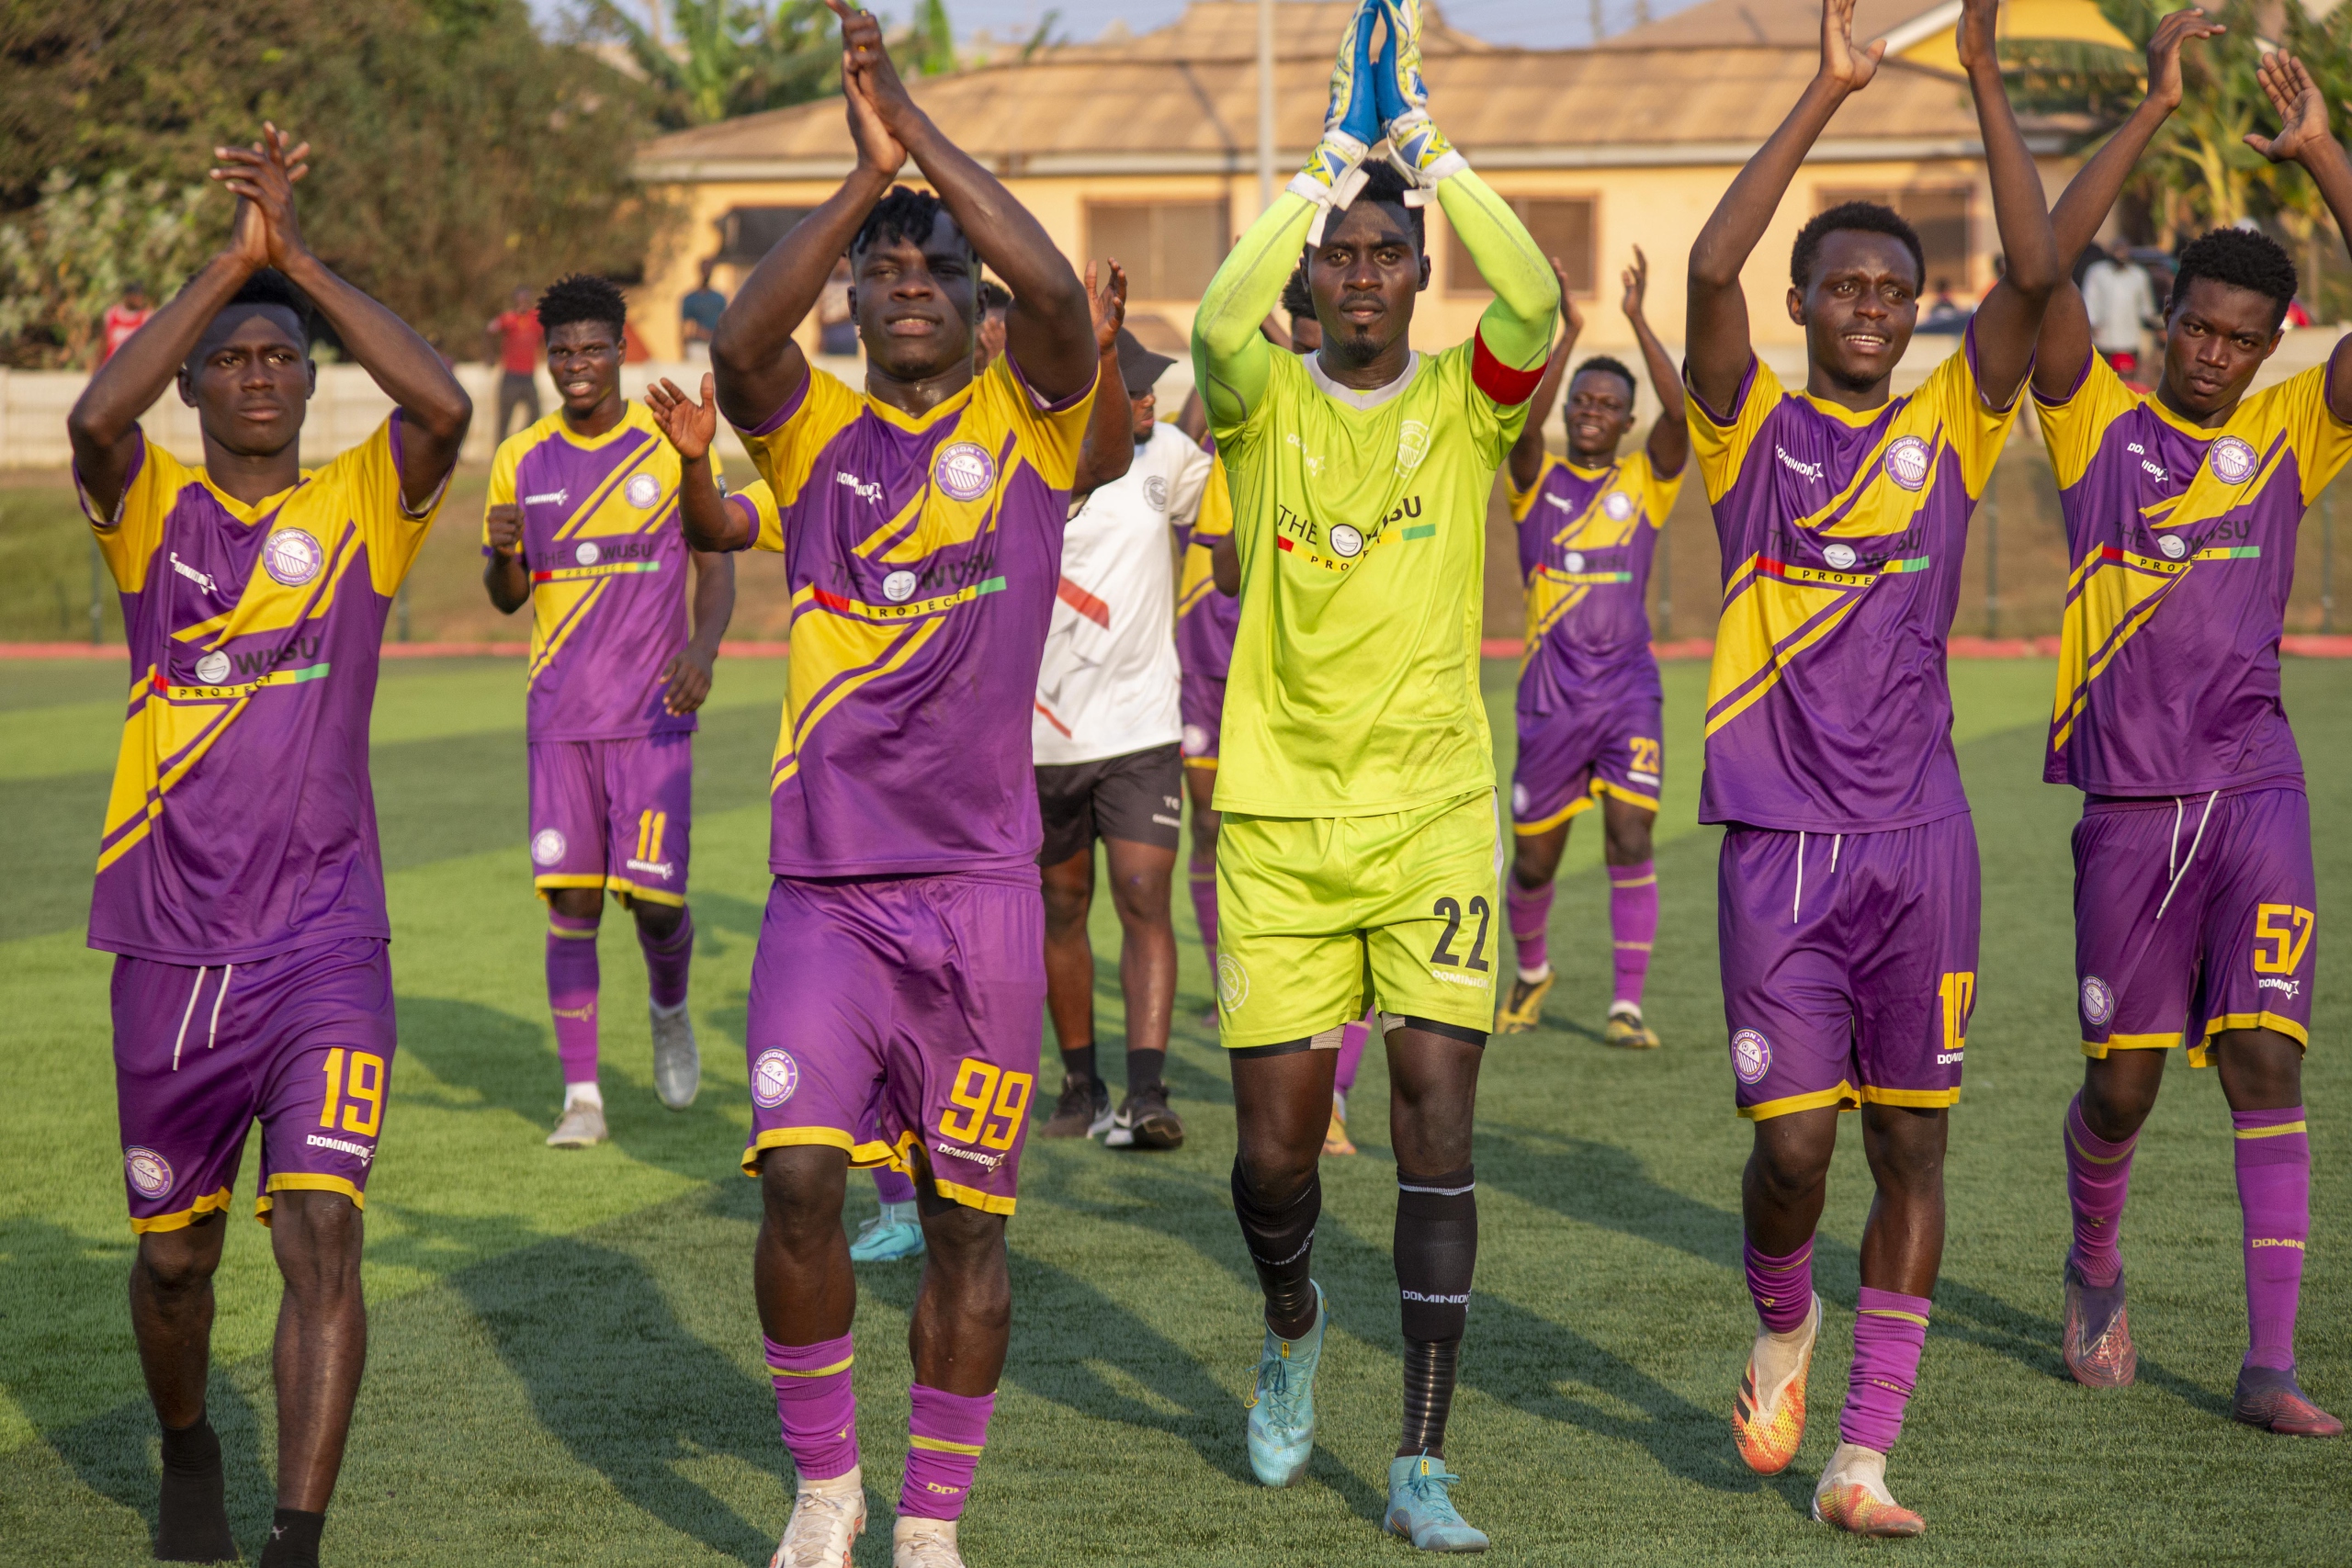 Vision FC lead in Zone Three of Access Bank Division One League